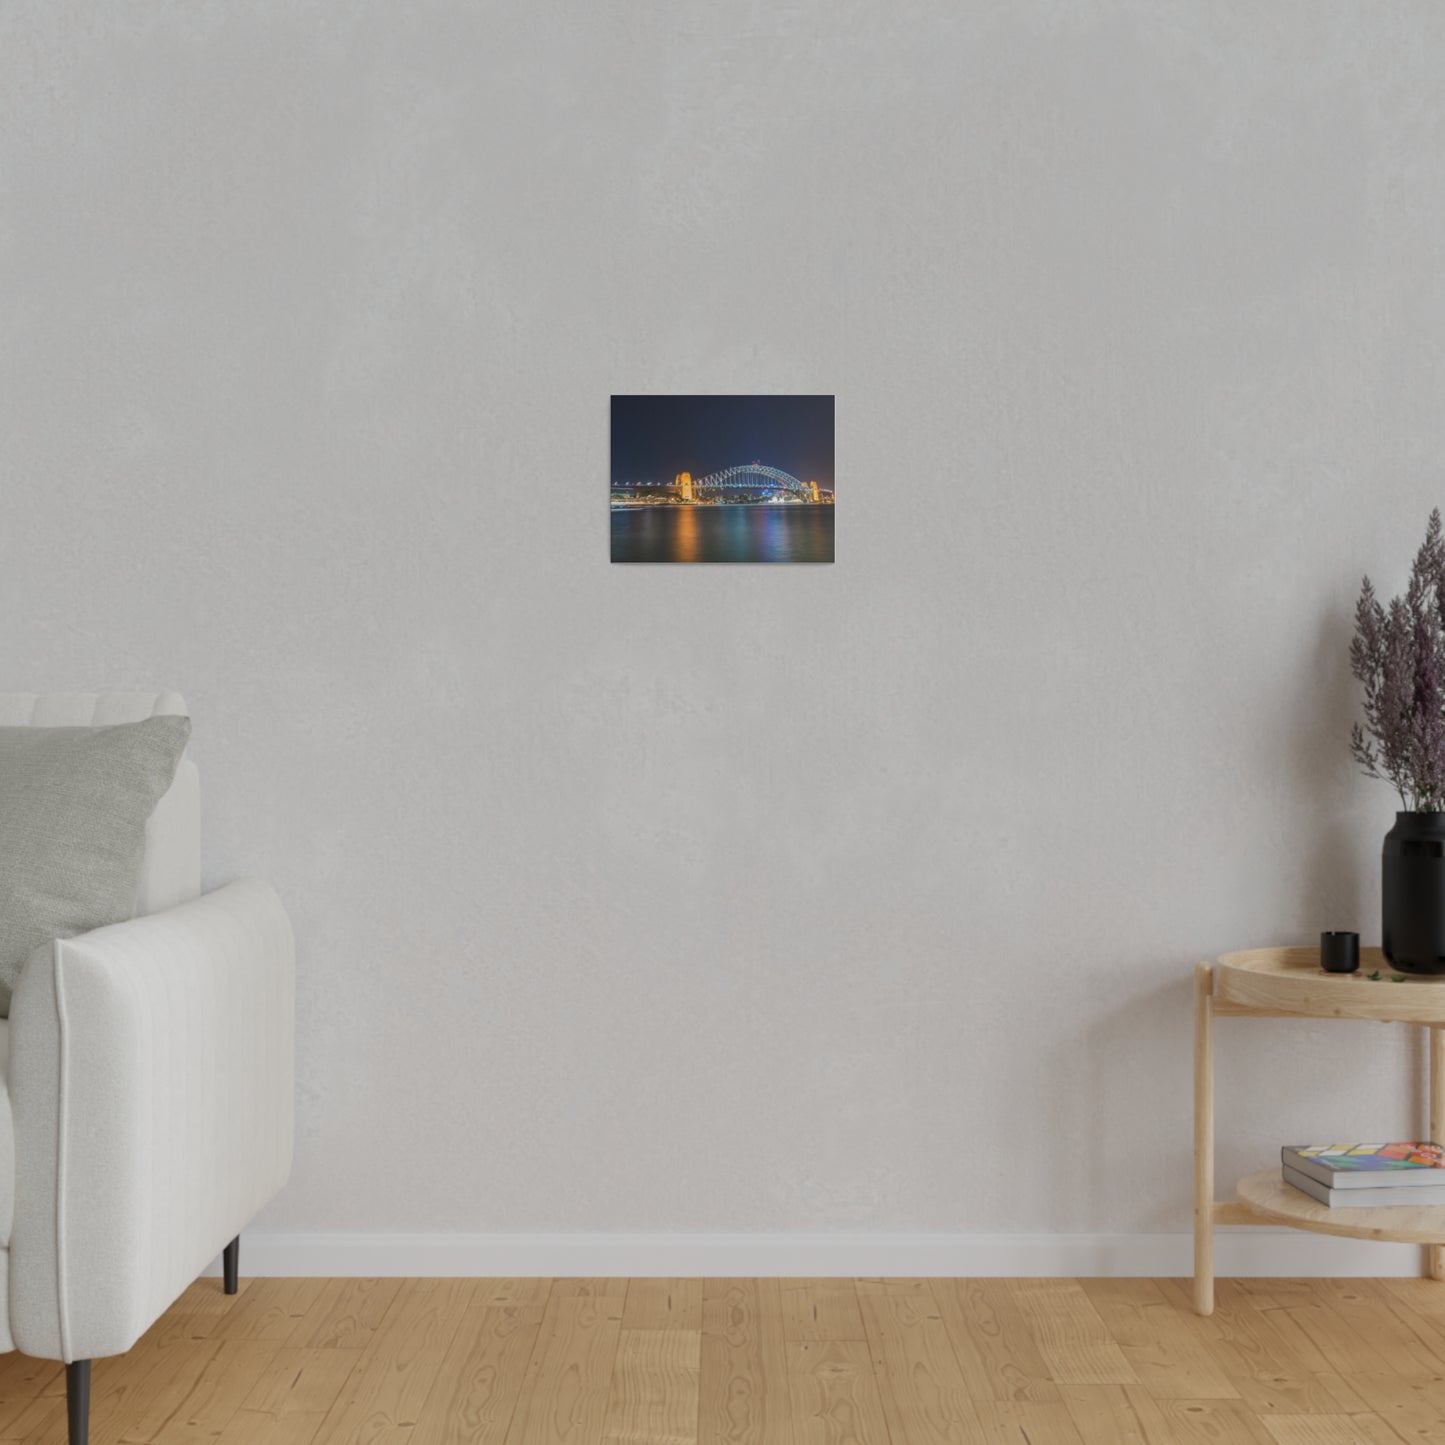 The dazzling Sydney Harbour Bridge at night printed on a stretched matte canvas